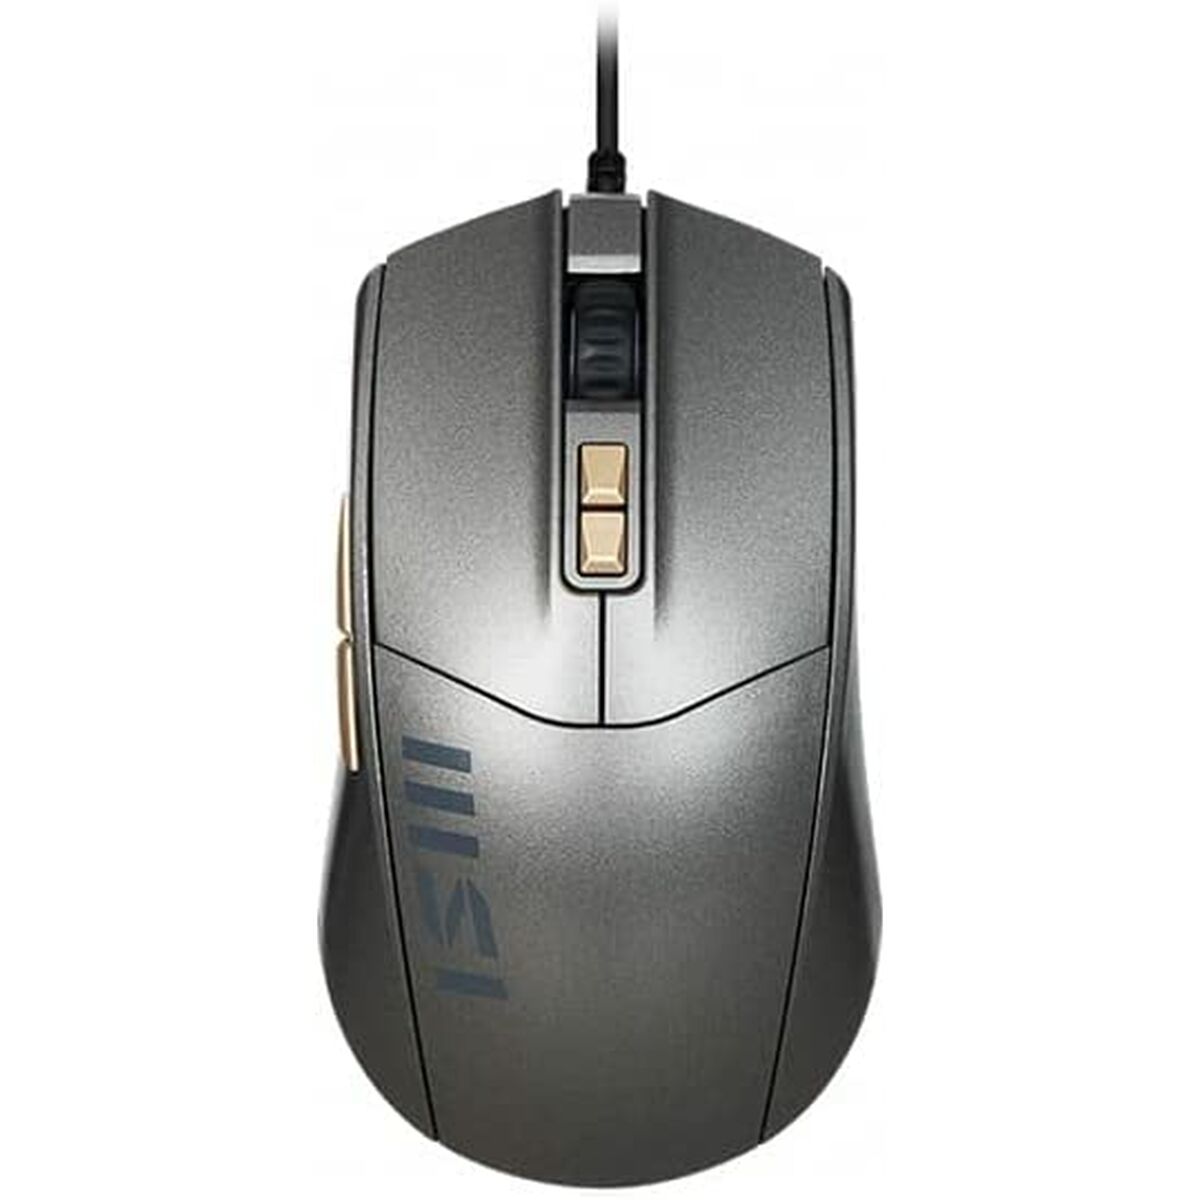 Mouse MSI Grey, MSI, Computing, Accessories, mouse-msi-grey, Brand_MSI, category-reference-2609, category-reference-2642, category-reference-2656, category-reference-t-19685, category-reference-t-19908, category-reference-t-21353, computers / peripherals, Condition_NEW, office, Price_20 - 50, Teleworking, RiotNook